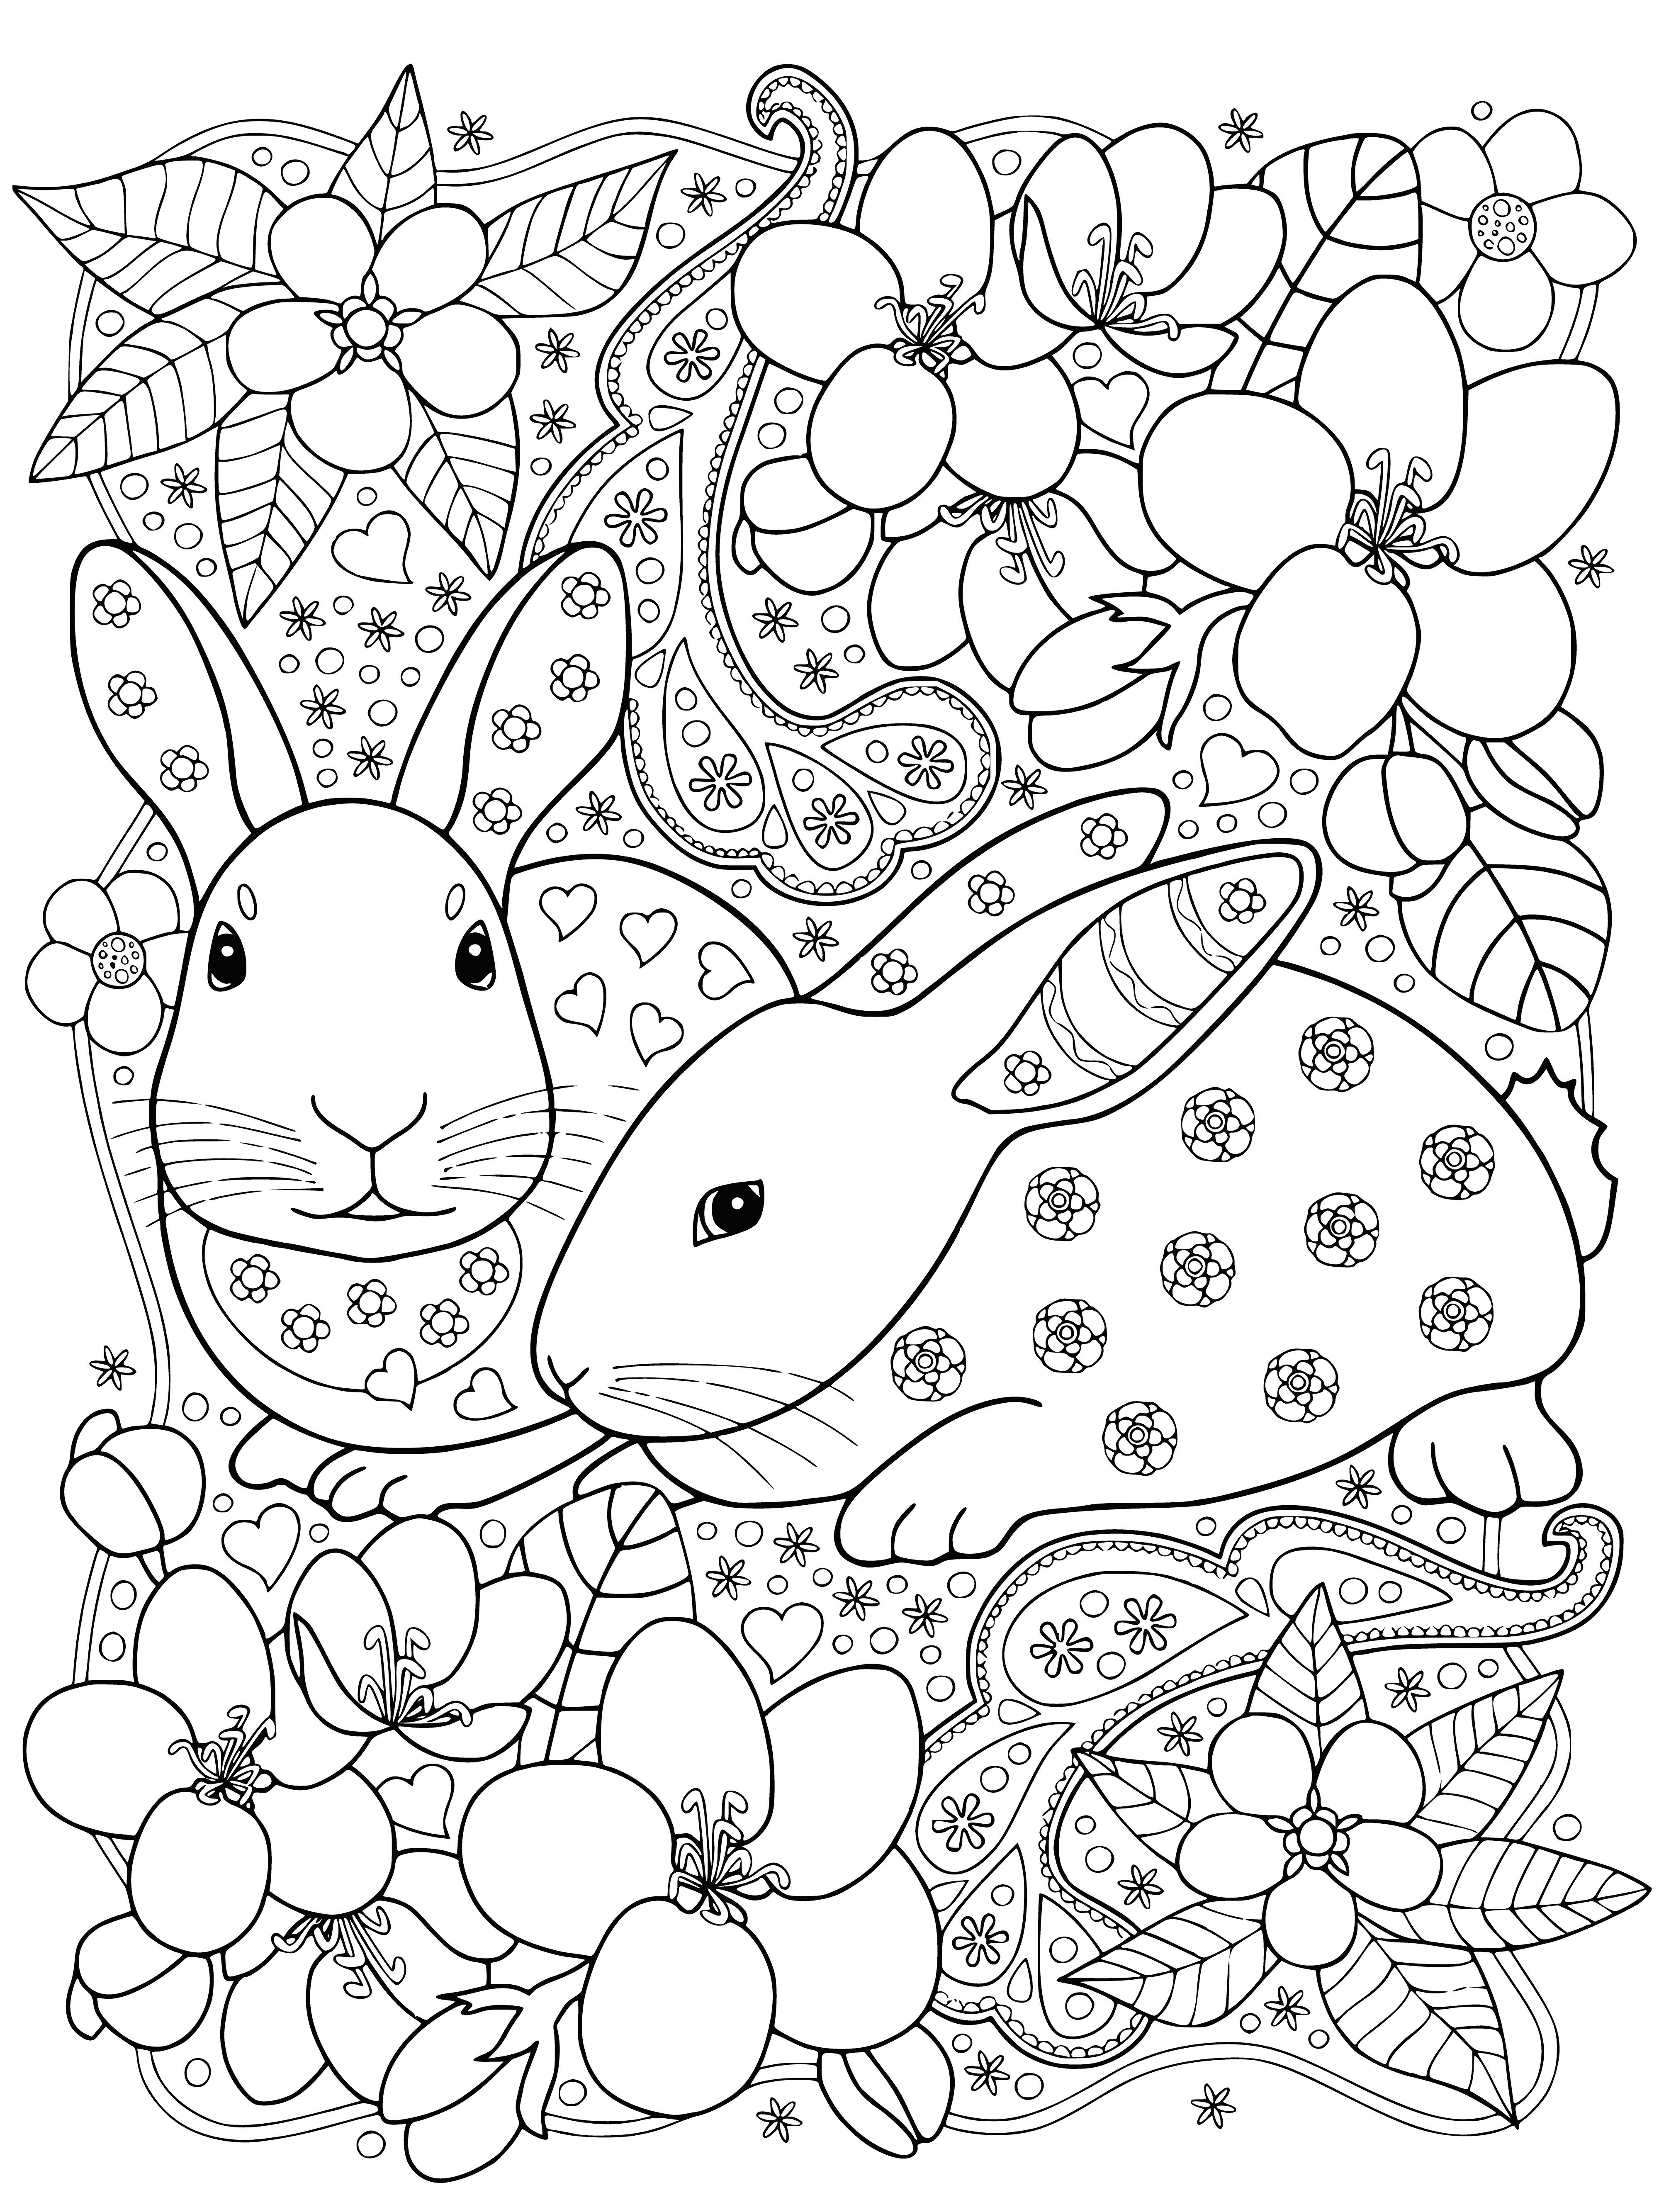 coloring page: Two rabbits are in a garden, one standing and one sitting, content and with eyes closed. Perfect for coloring pages!